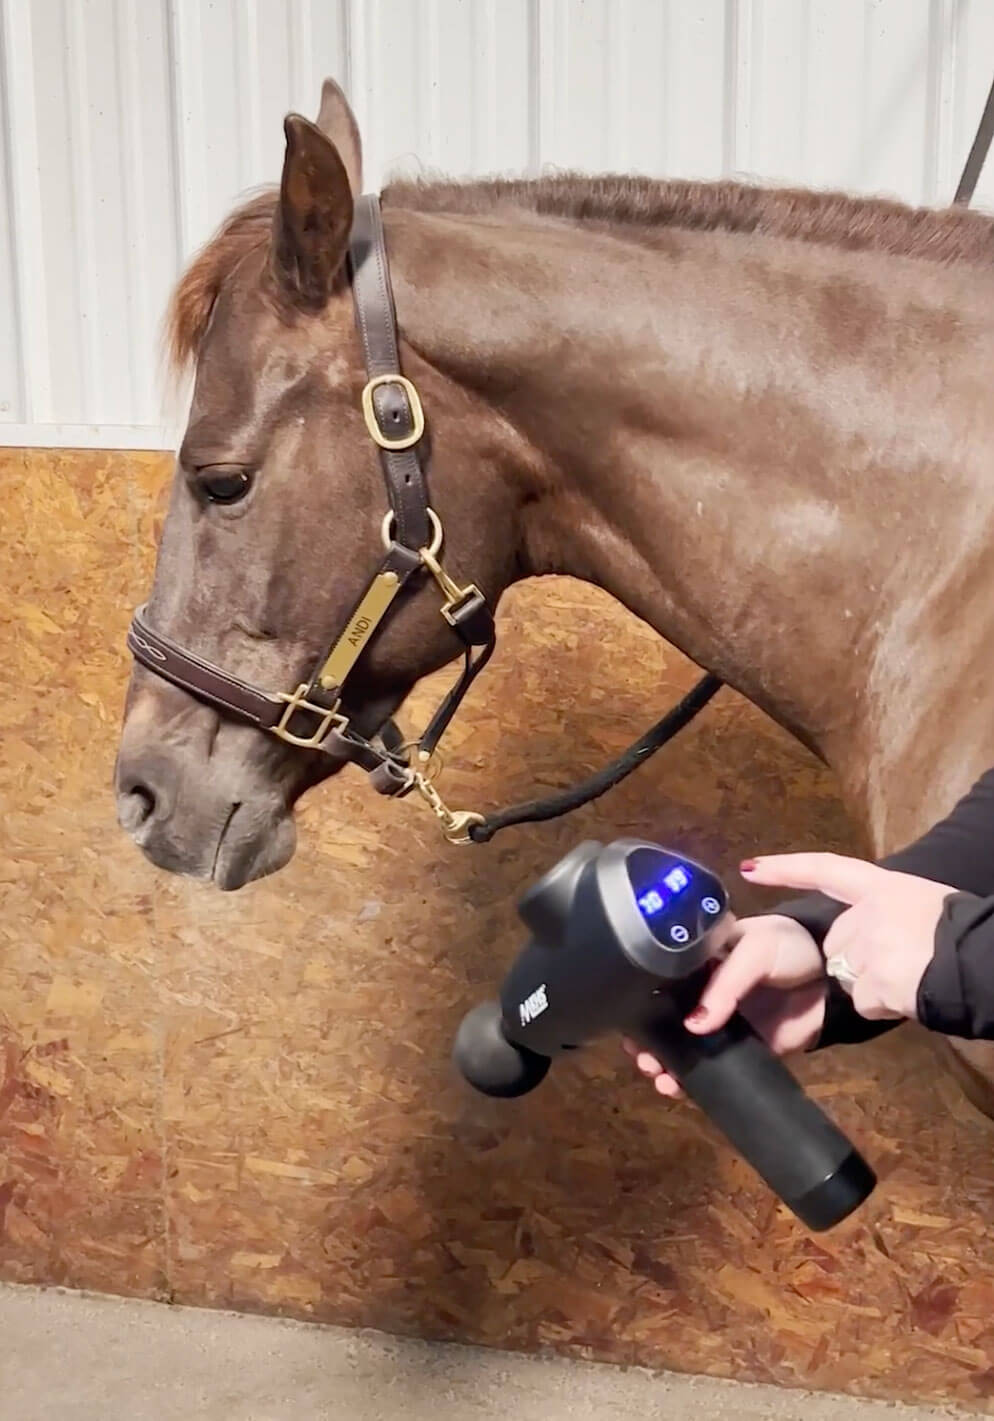 Massage Gun Course for Horse Owners